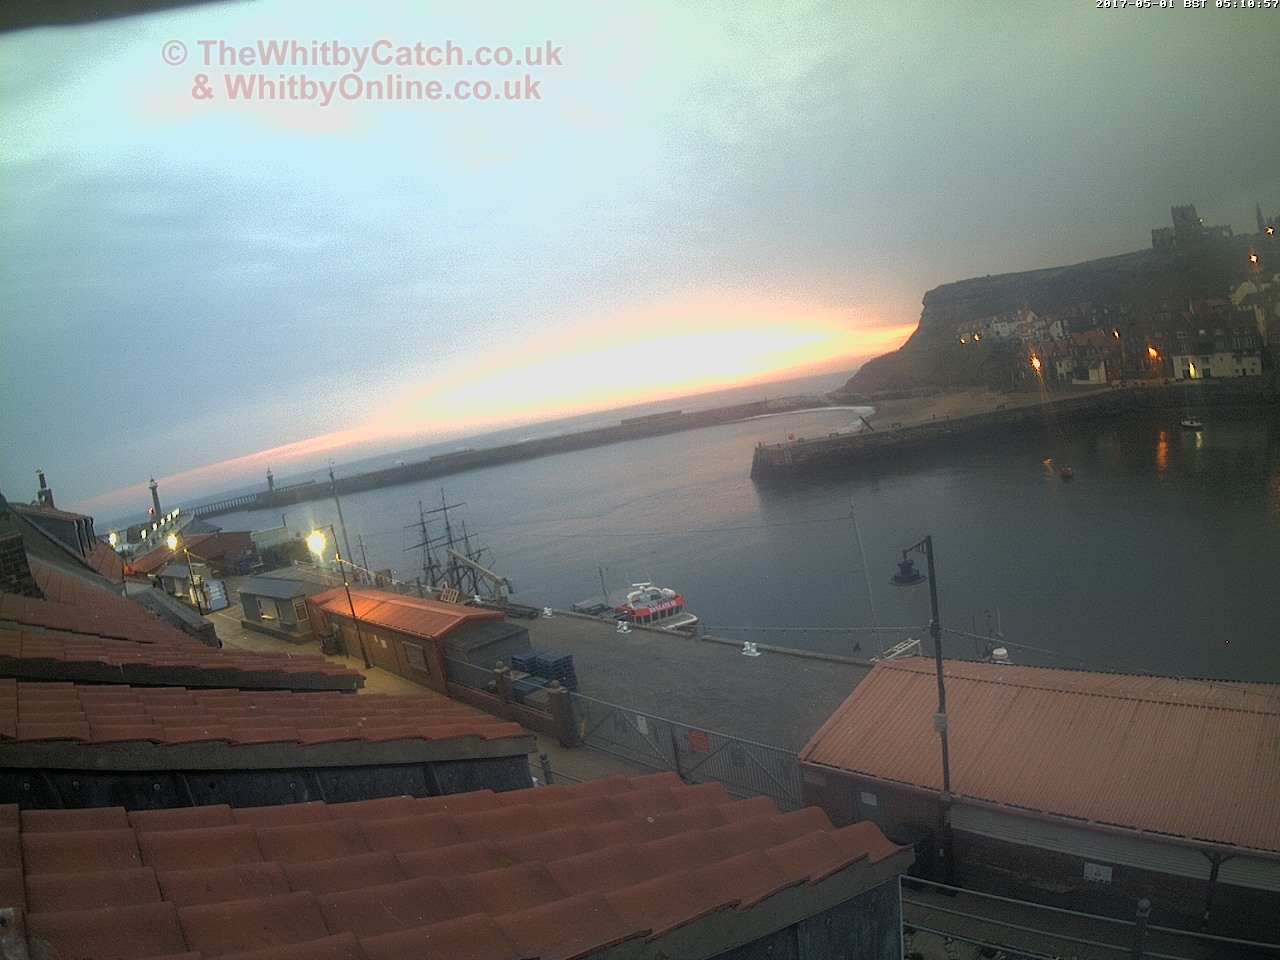 Whitby Mon 1st May 2017 05:11.